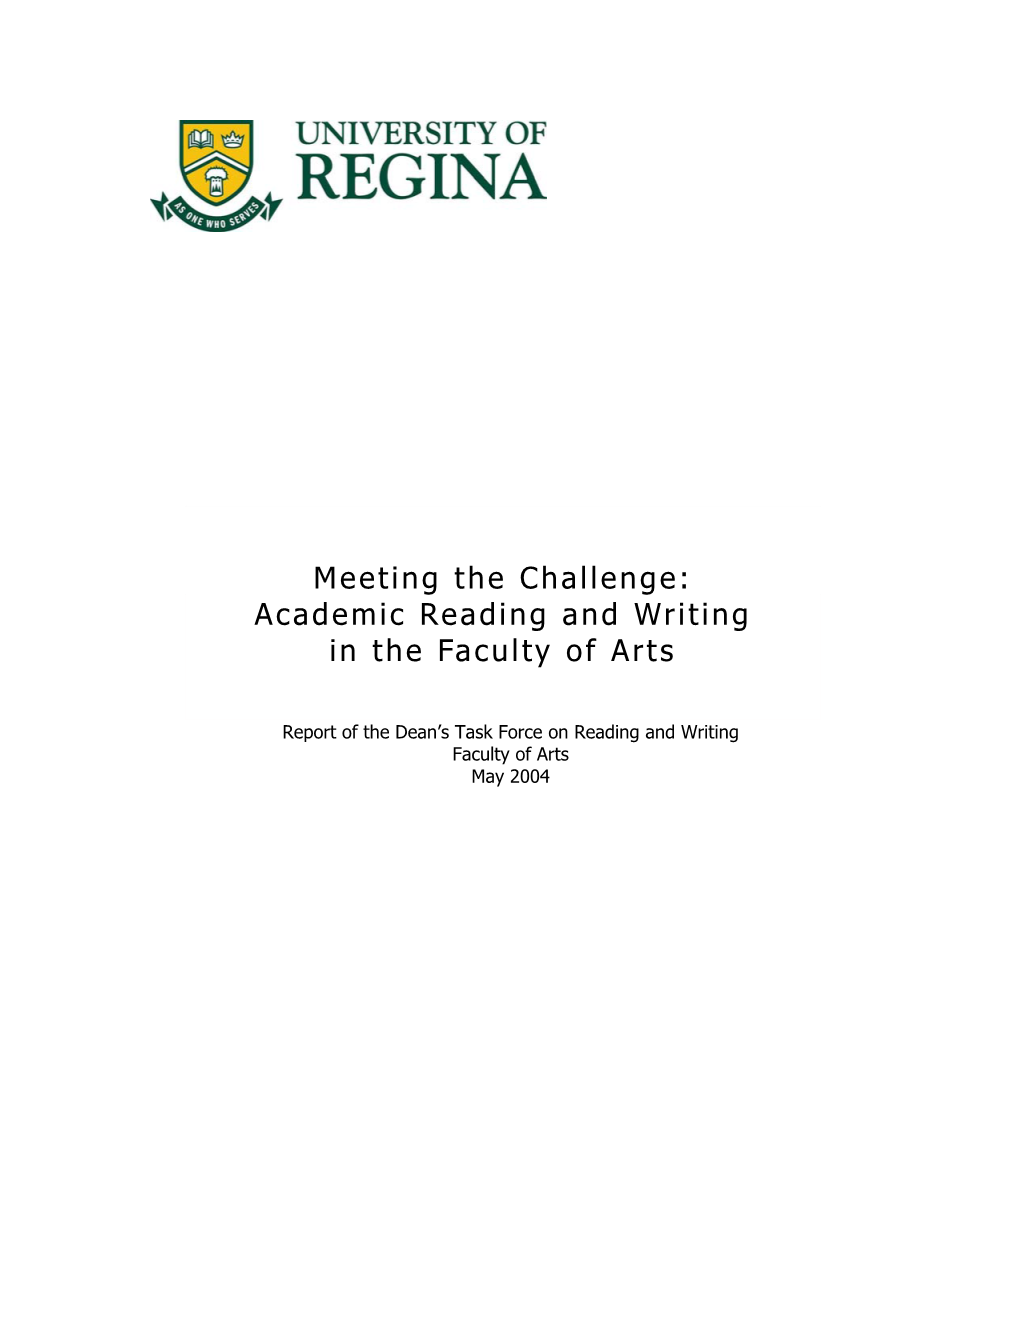 Academic Reading and Writing in the Faculty of Arts